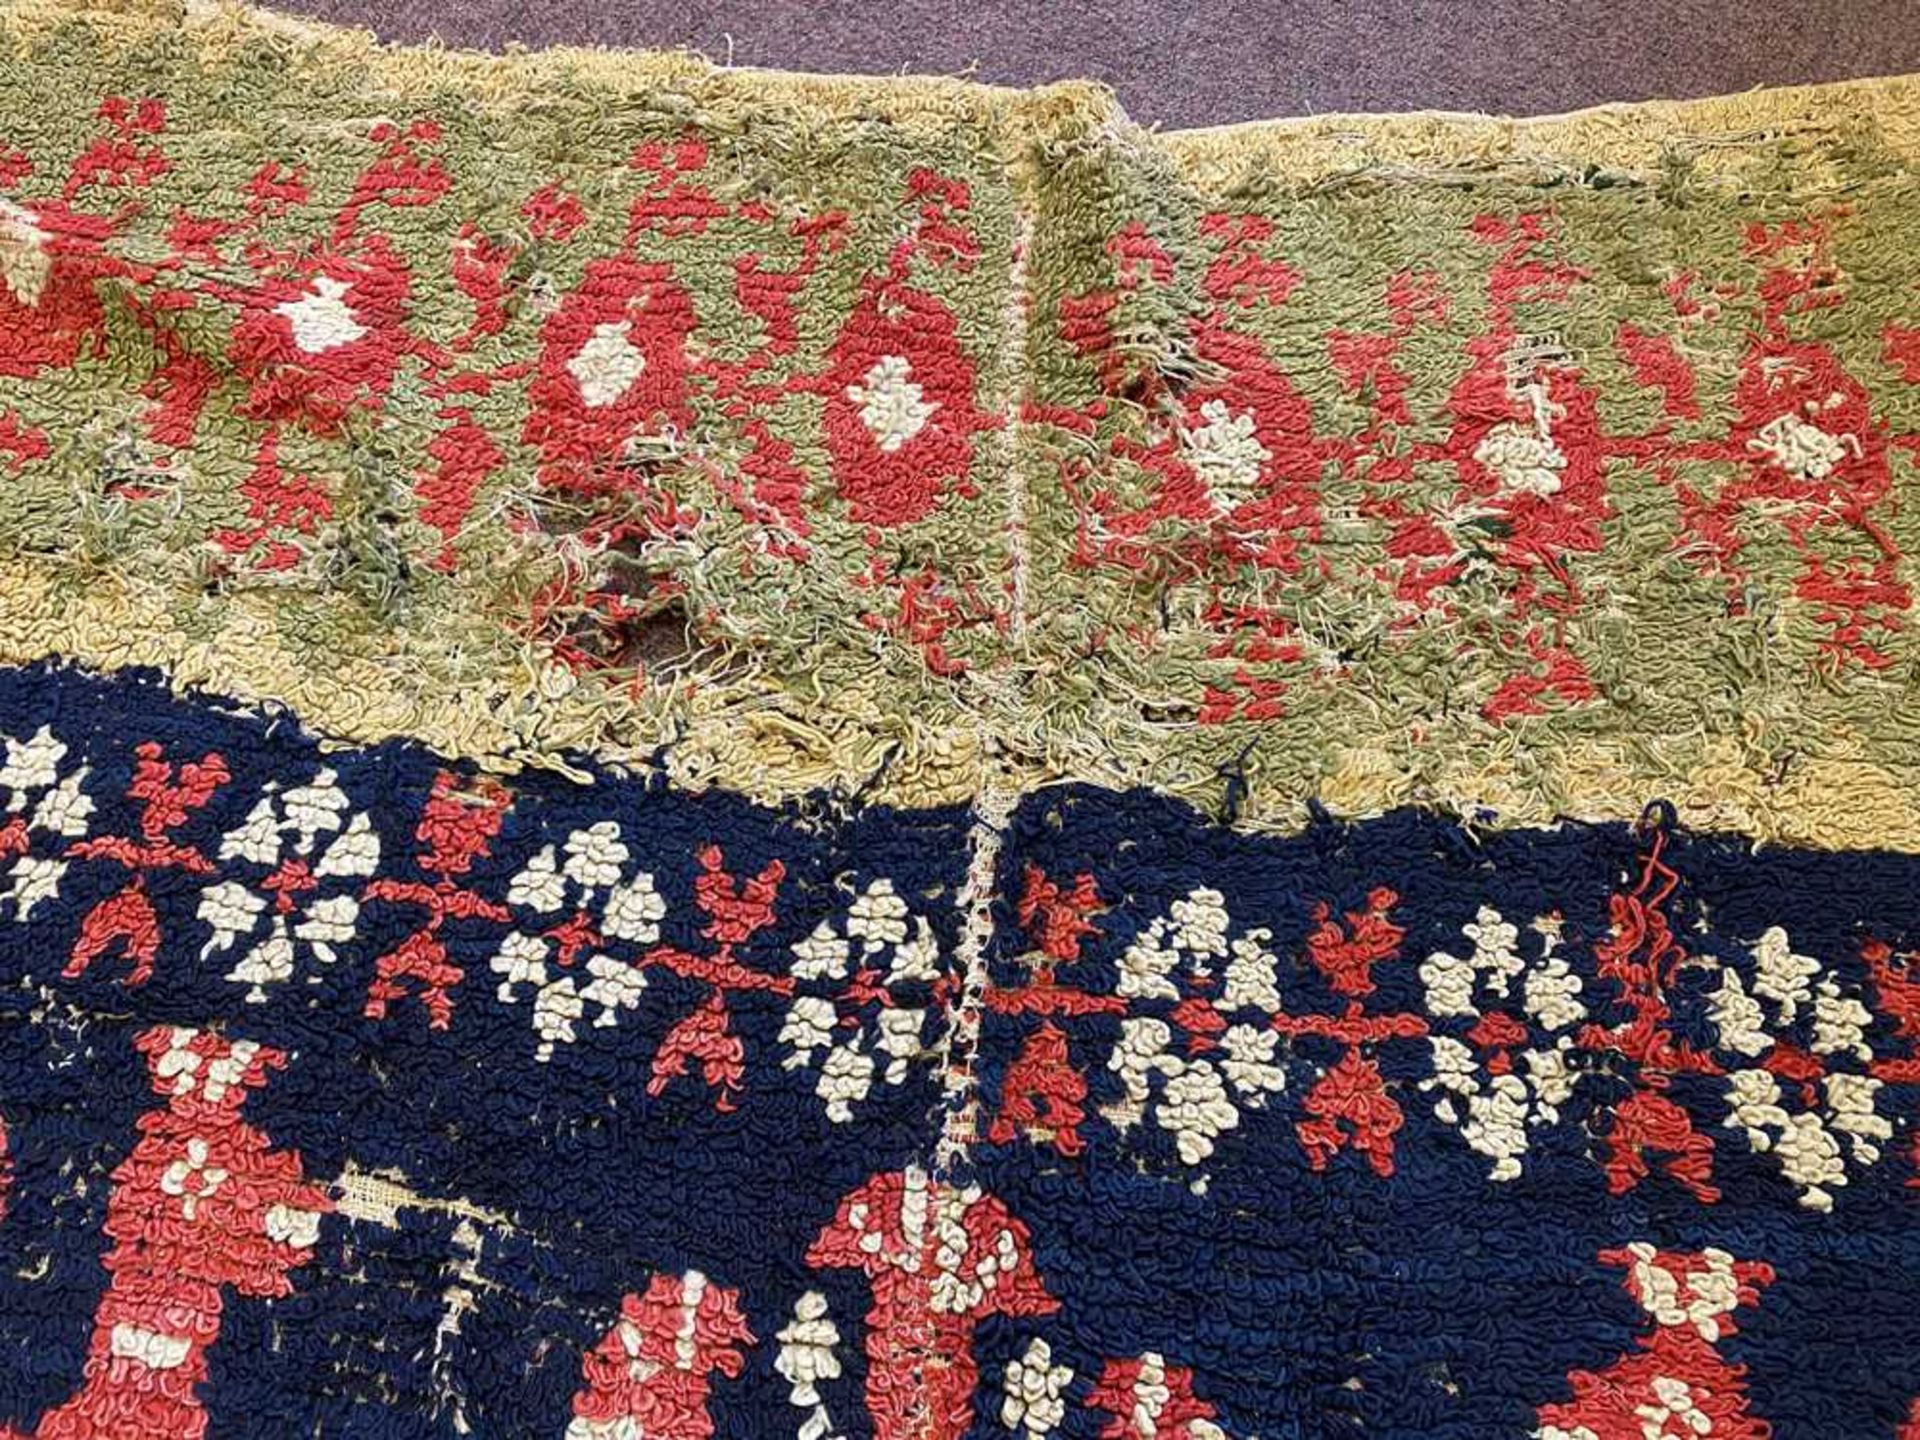 ALPUJARRA CARPET SOUTH SPAIN, LATE 18TH/EARLY 19TH CENTURY - Image 3 of 11